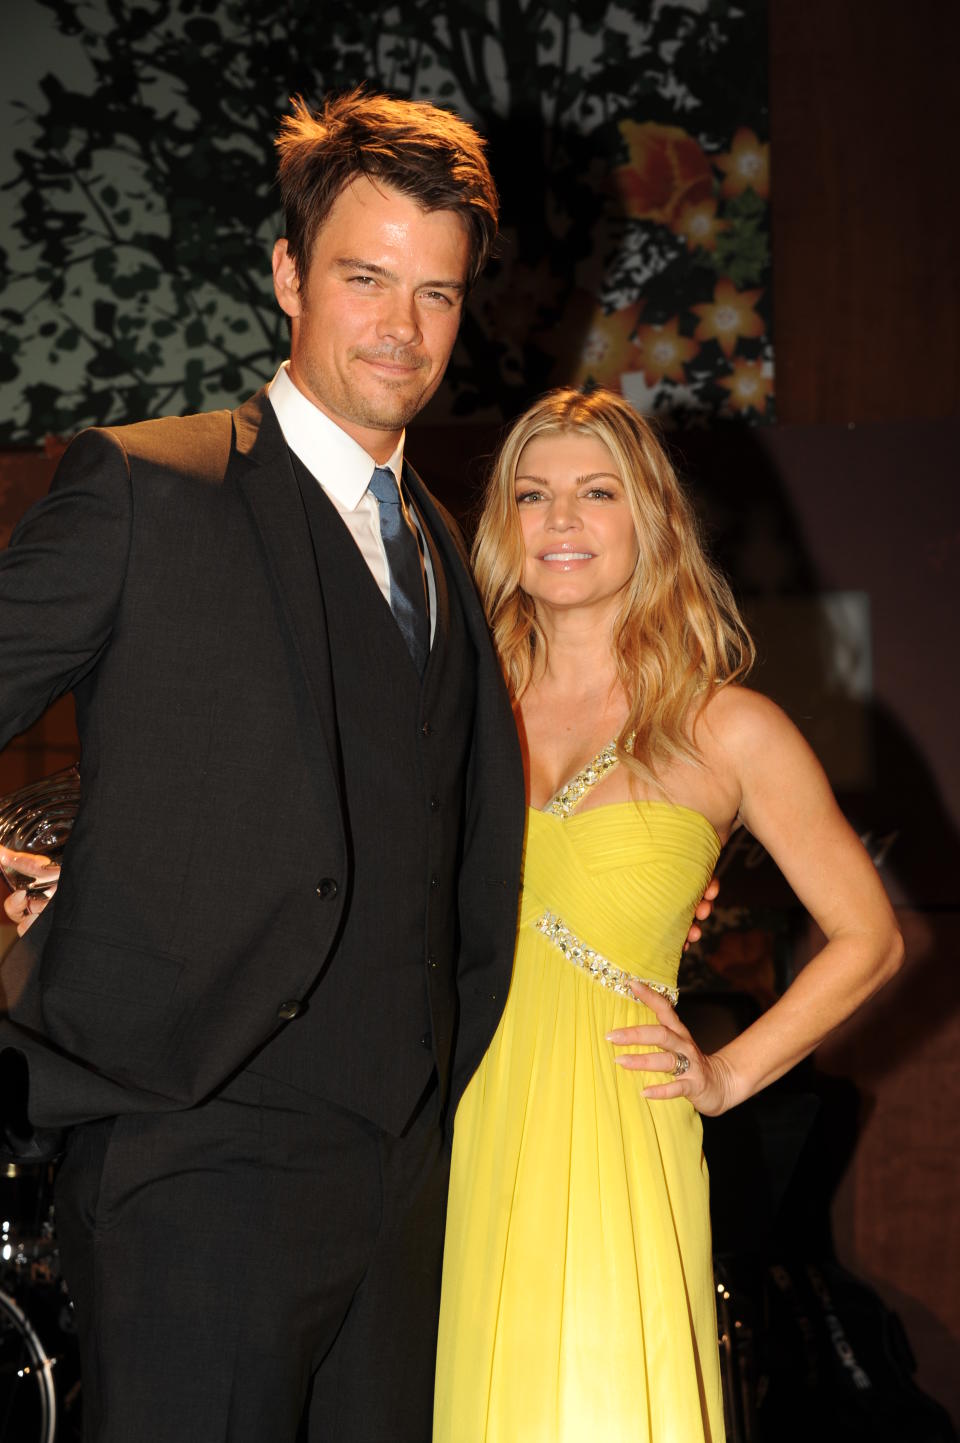 Josh Duhamel (L) and Fergie attend the Fragrance Foundation's 39th annual FiFi Awards at Lincoln Center. (Photo by Steve Eichner/WWD/Penske Media via Getty Images)